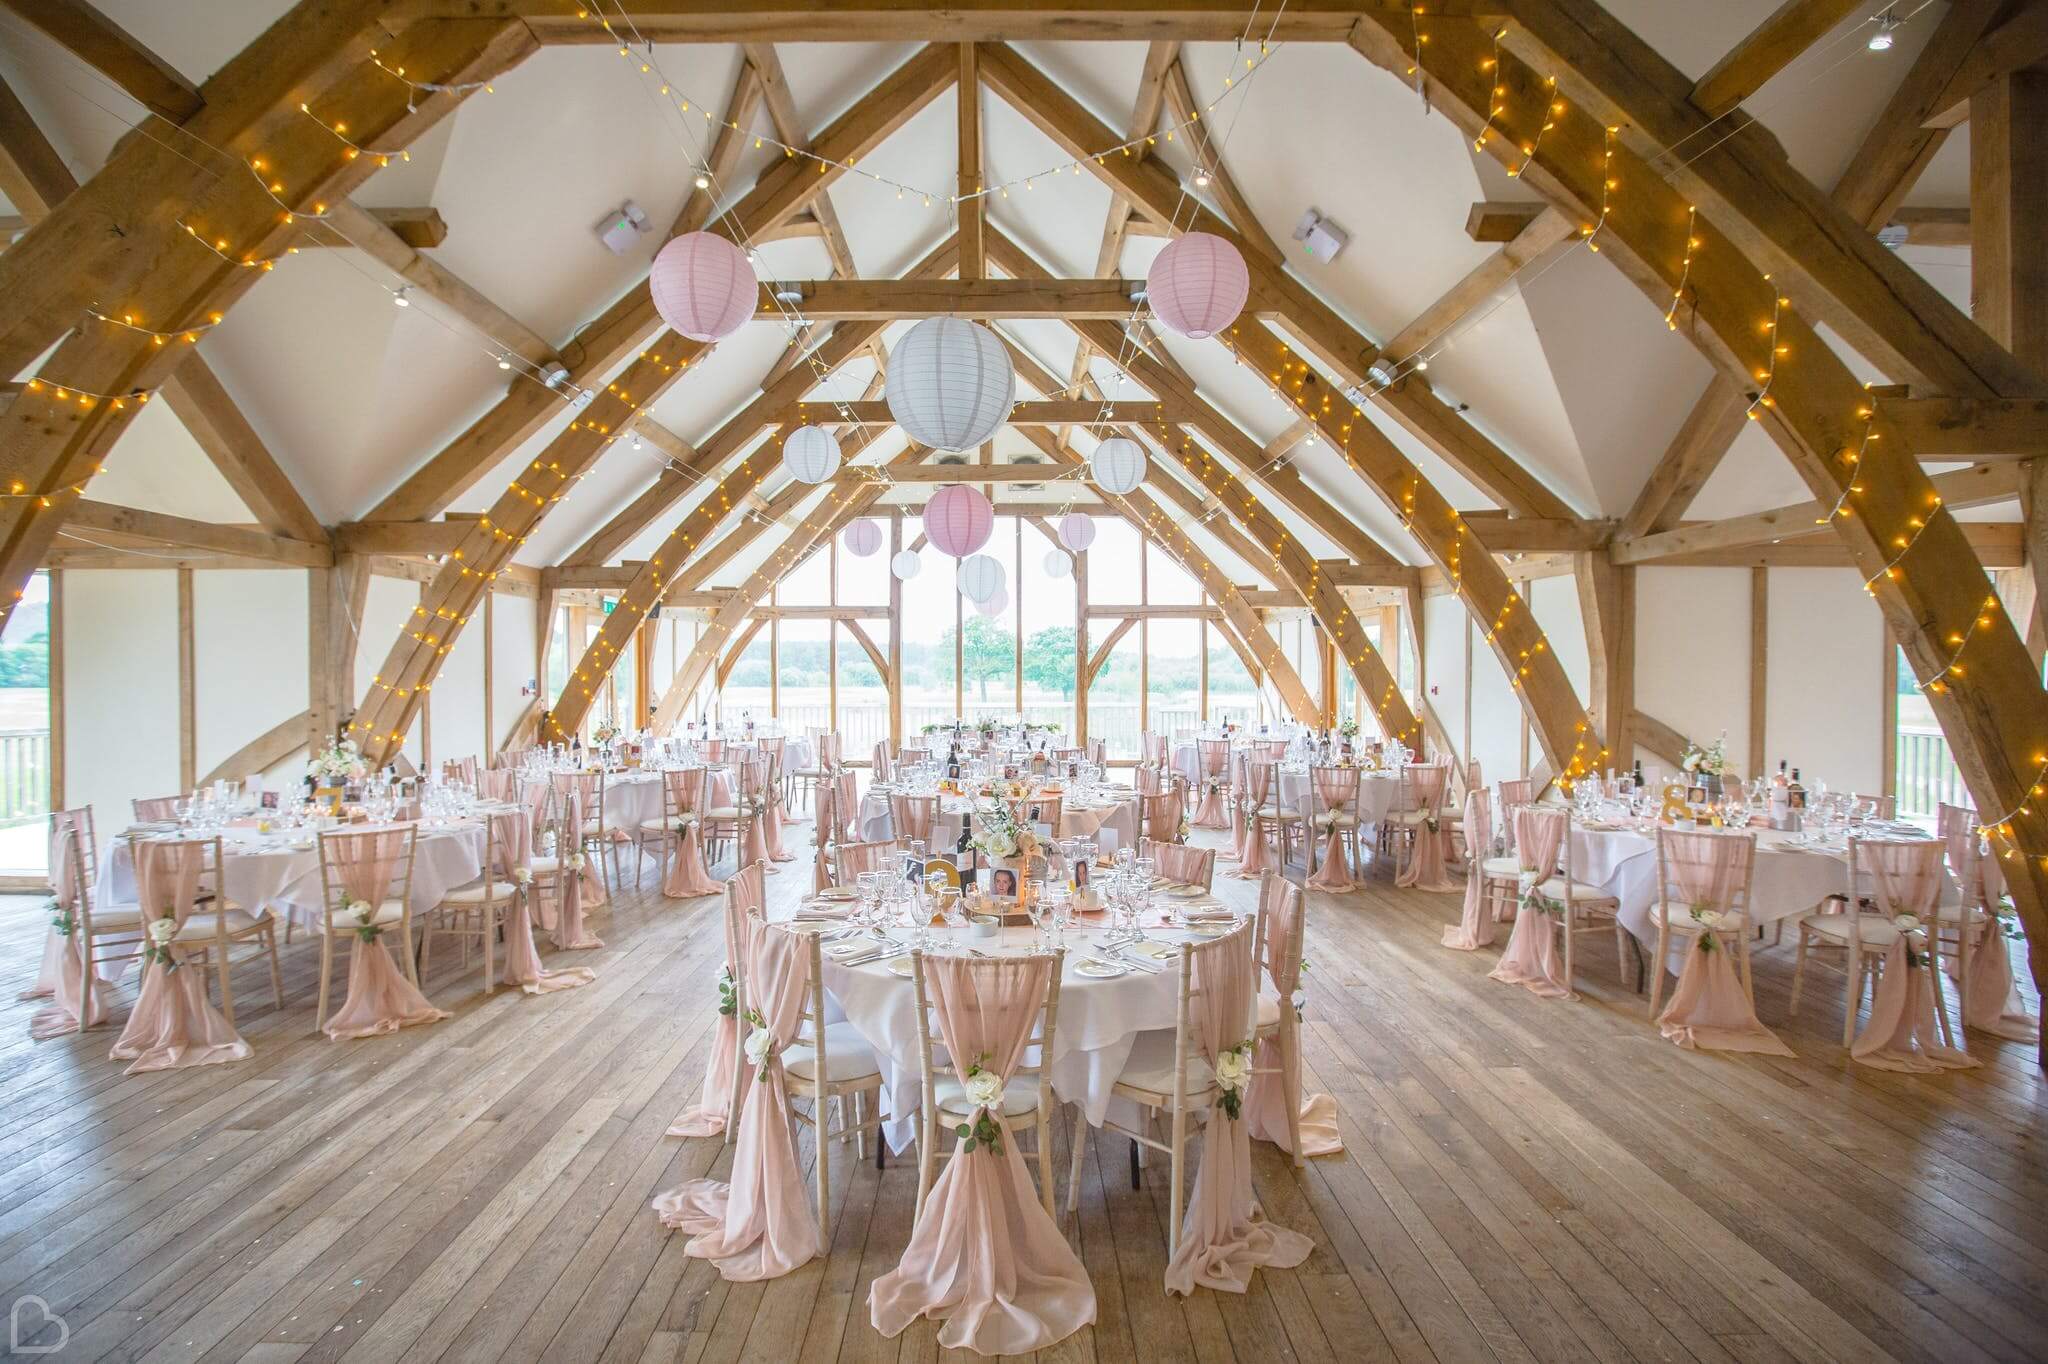 sanburn hall decorated for a wedding, this is a barn wedding venue in yorkshire, uk